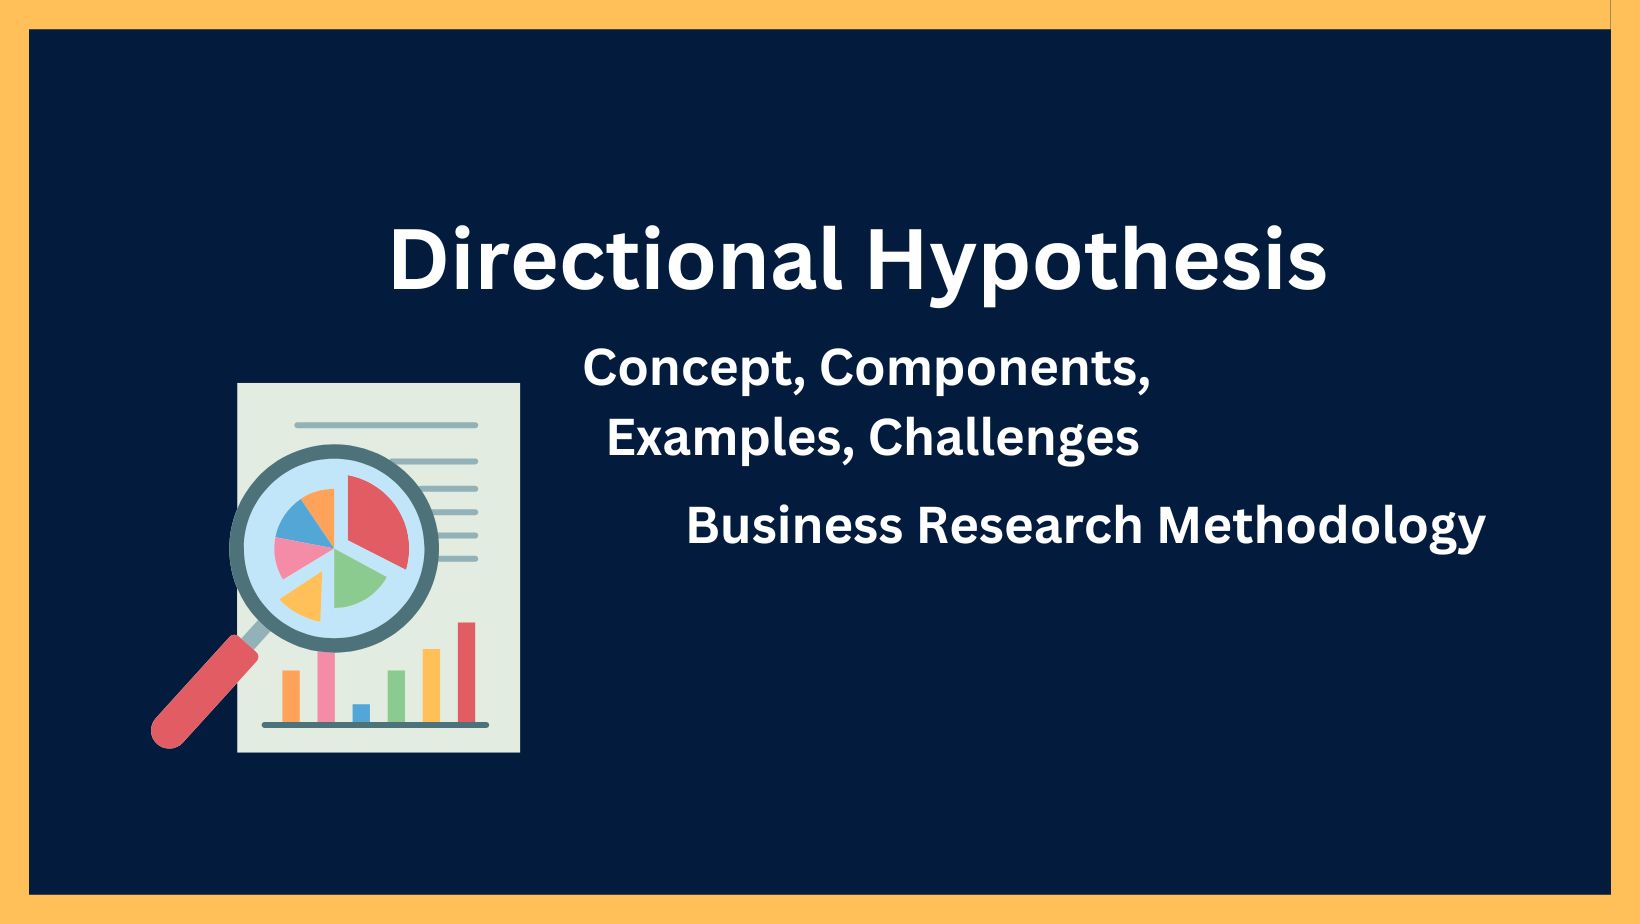 directional hypothesis definition psychology example